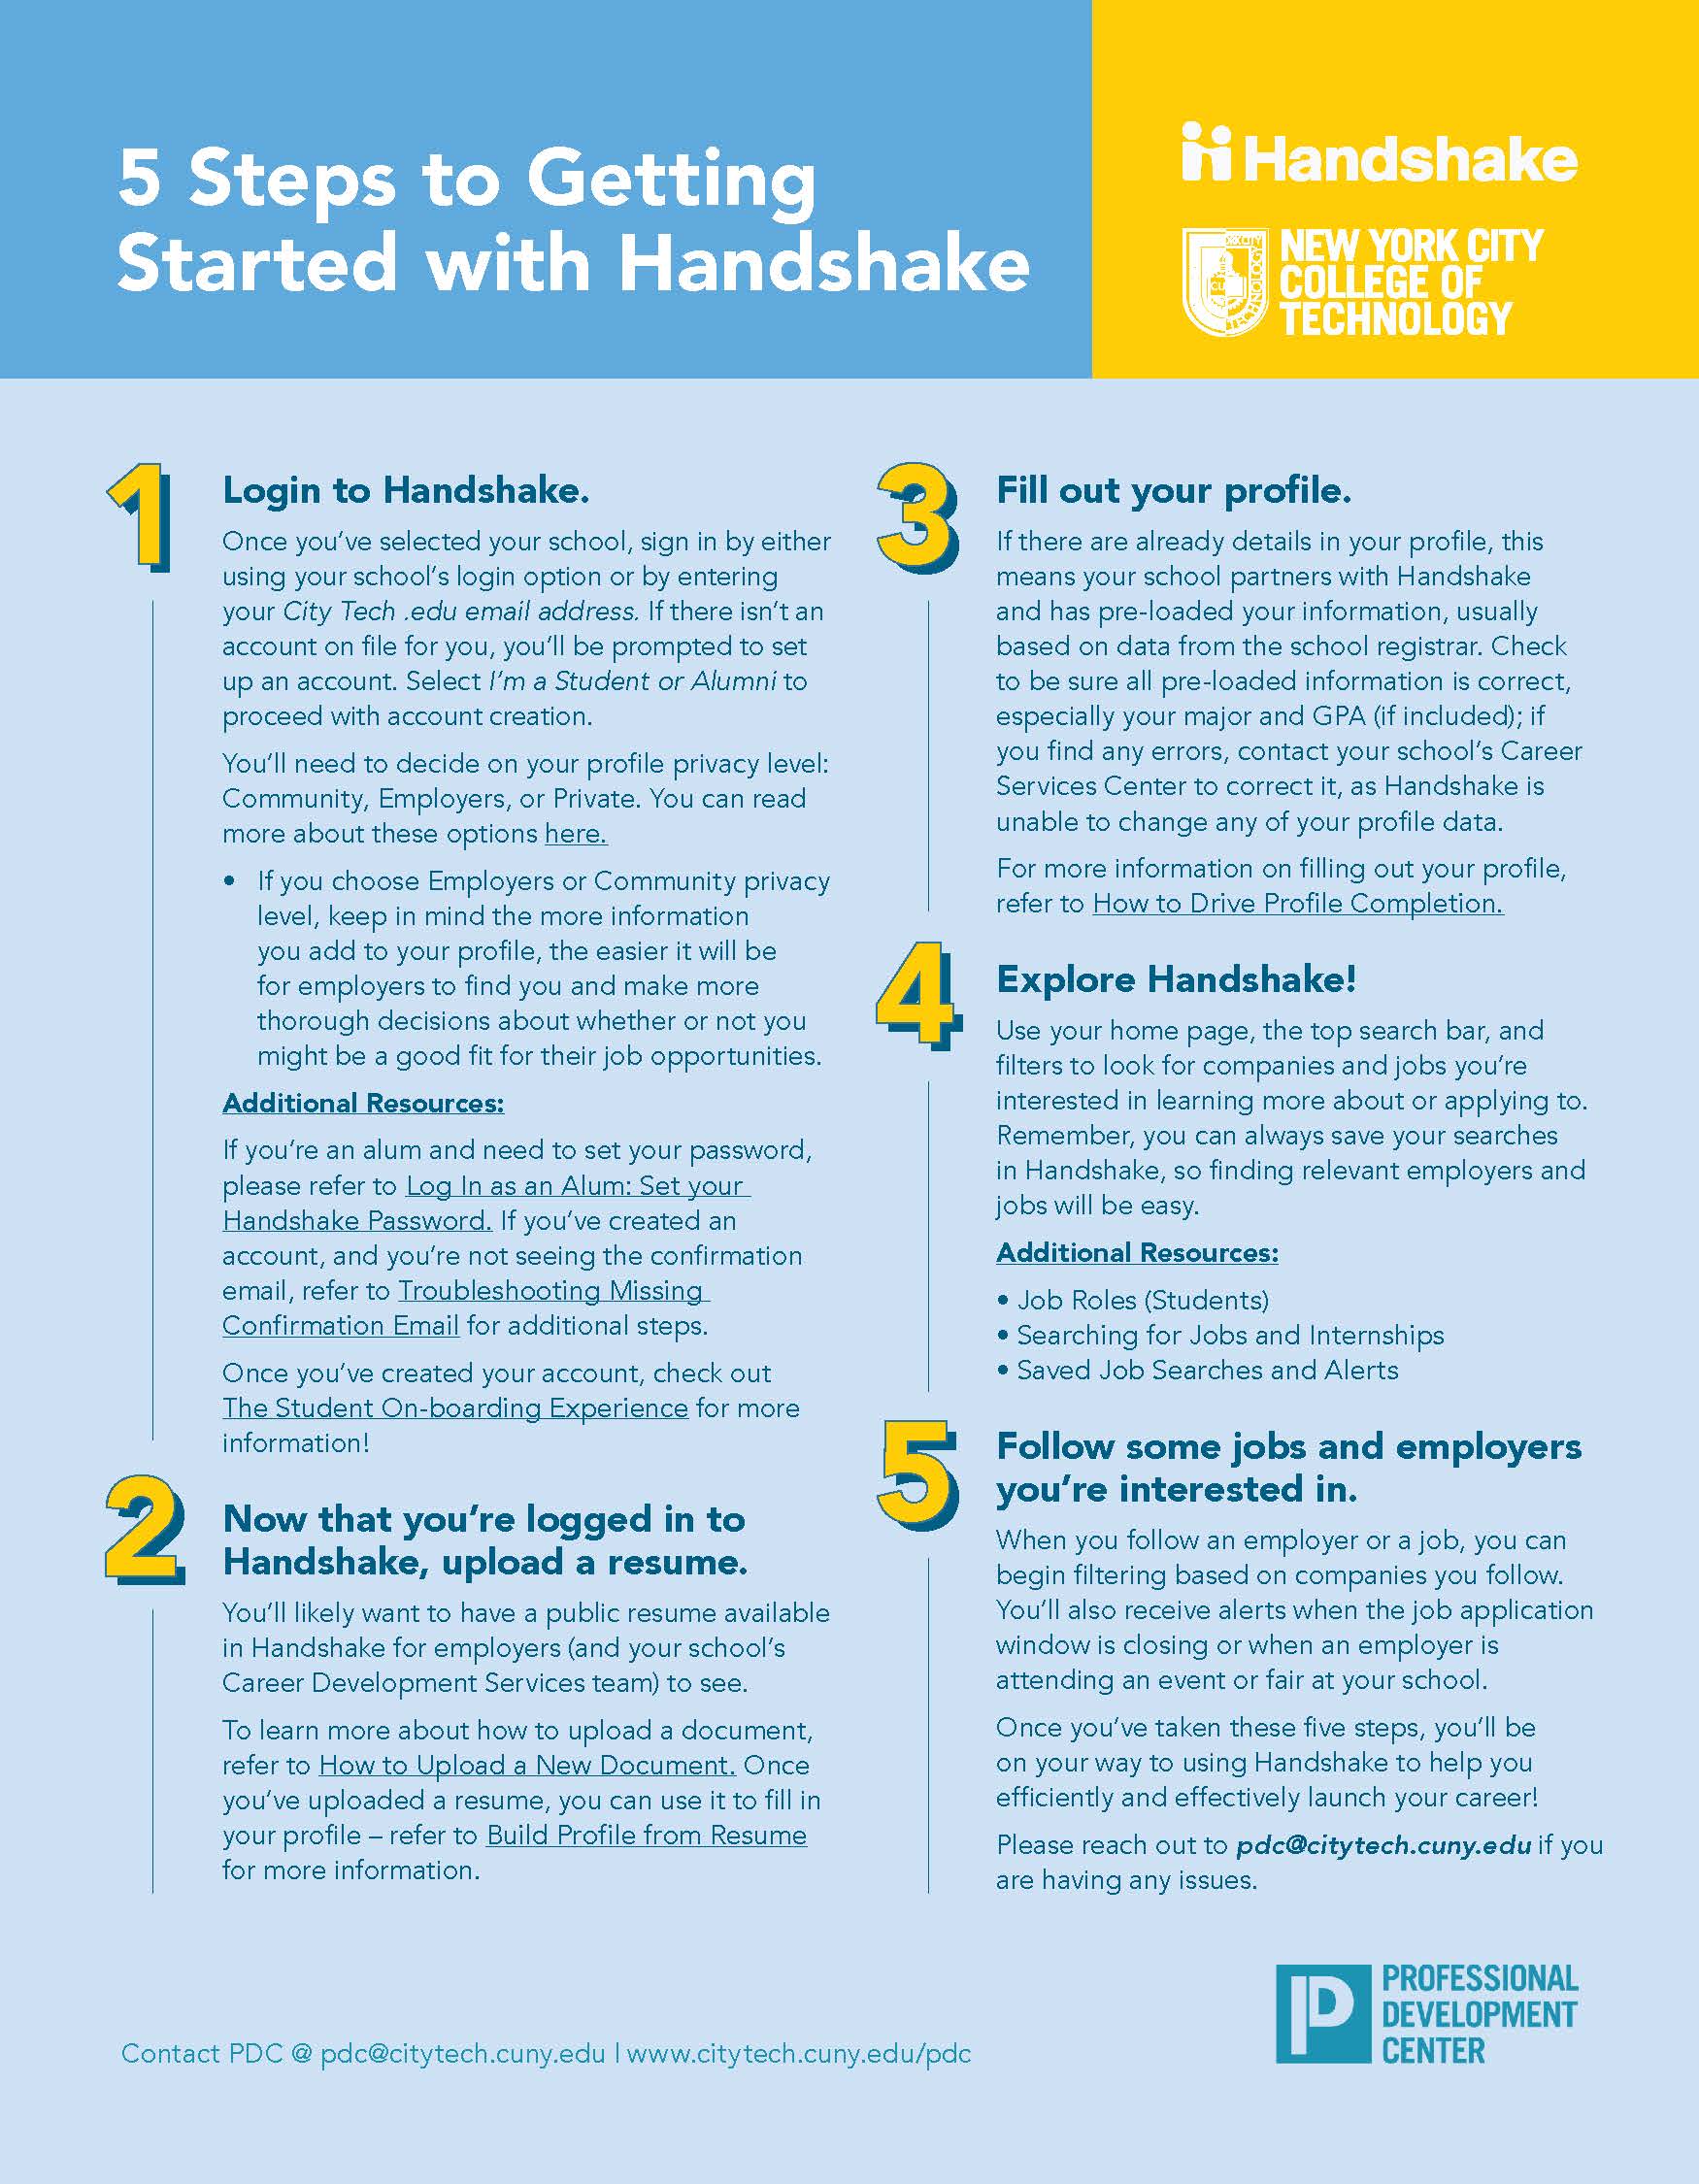 5 Steps to Getting Started with Handshake